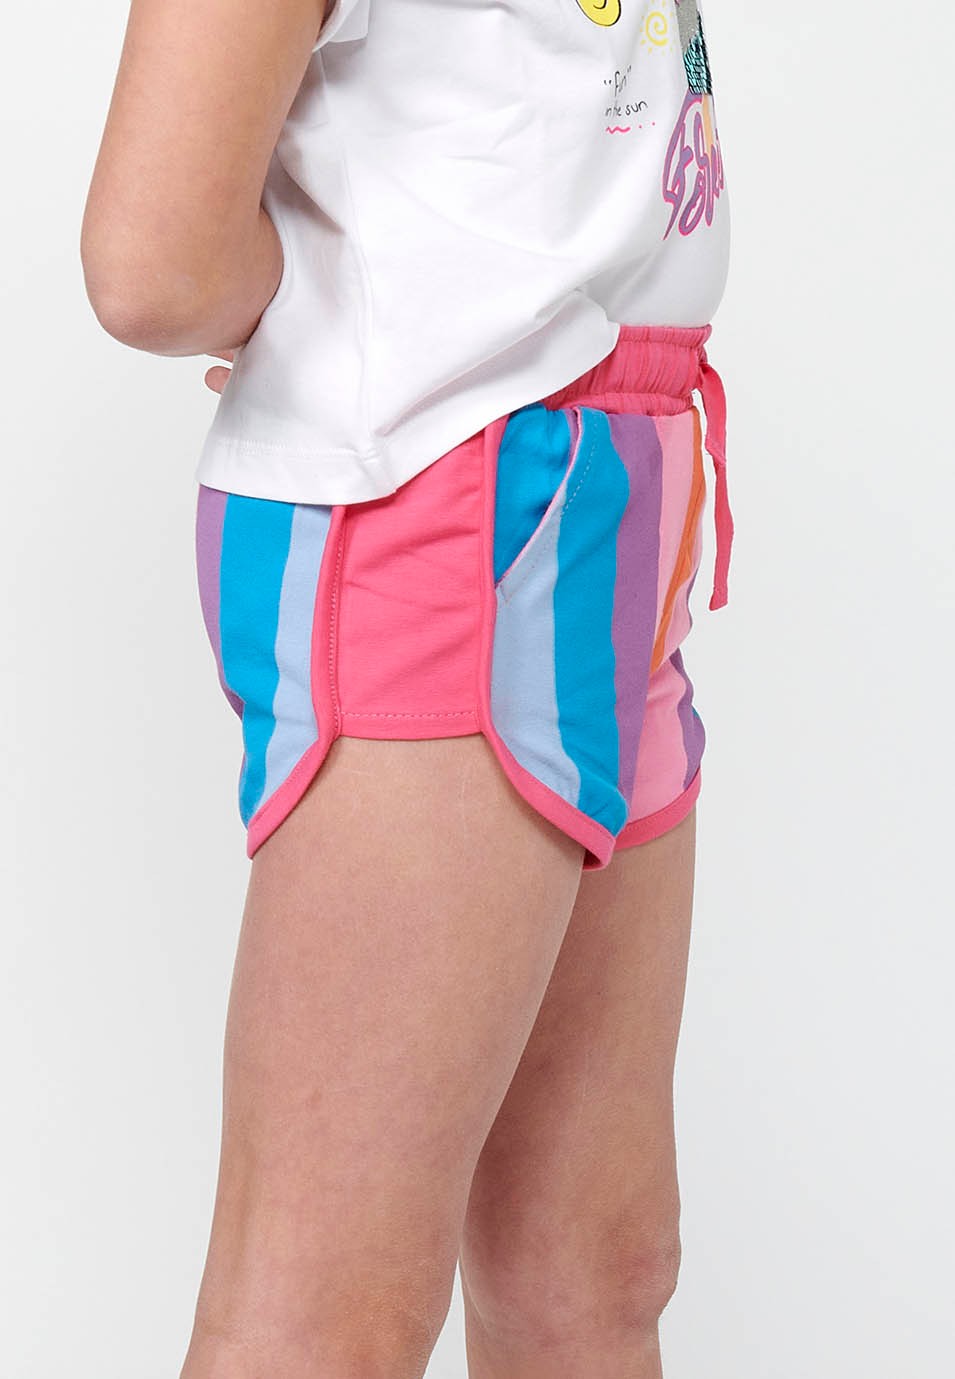 Pink Shorts with Adjustable Rubberized Waistband with Drawstring and Striped Fabric for Girls 6